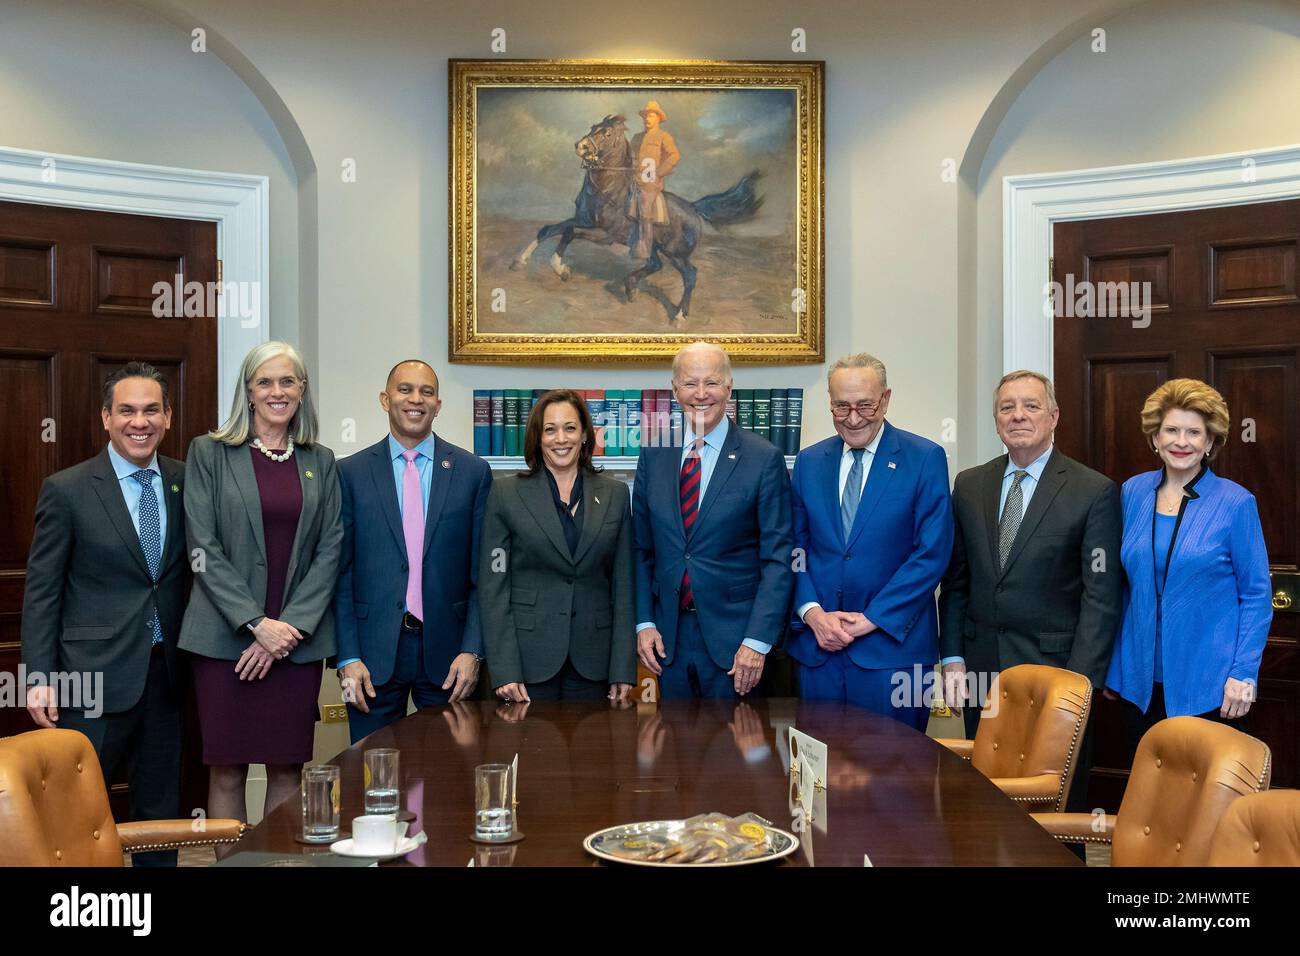 Washington, United States of America. 24 January, 2023. U.S President Joe Biden, center, poses for a group photo with Vice President Kamala Harris, center left, and members of the Democratic Congressional Leadership at the Roosevelt Room of the White House, January 24, 2023 in Washington, D.C. Left to right: Rep. Pete Aguilar, Rep. Katherine Clark, Minority Leader Hakeem Jeffries, Vice President Kamala Harris, President Joe Biden, Majority Leader Chuck Schumer, Sen. Dick Durbin, and Sen. Debbie Stabenow.  Credit: Erin Scott/White House Photo/Alamy Live News Stock Photo